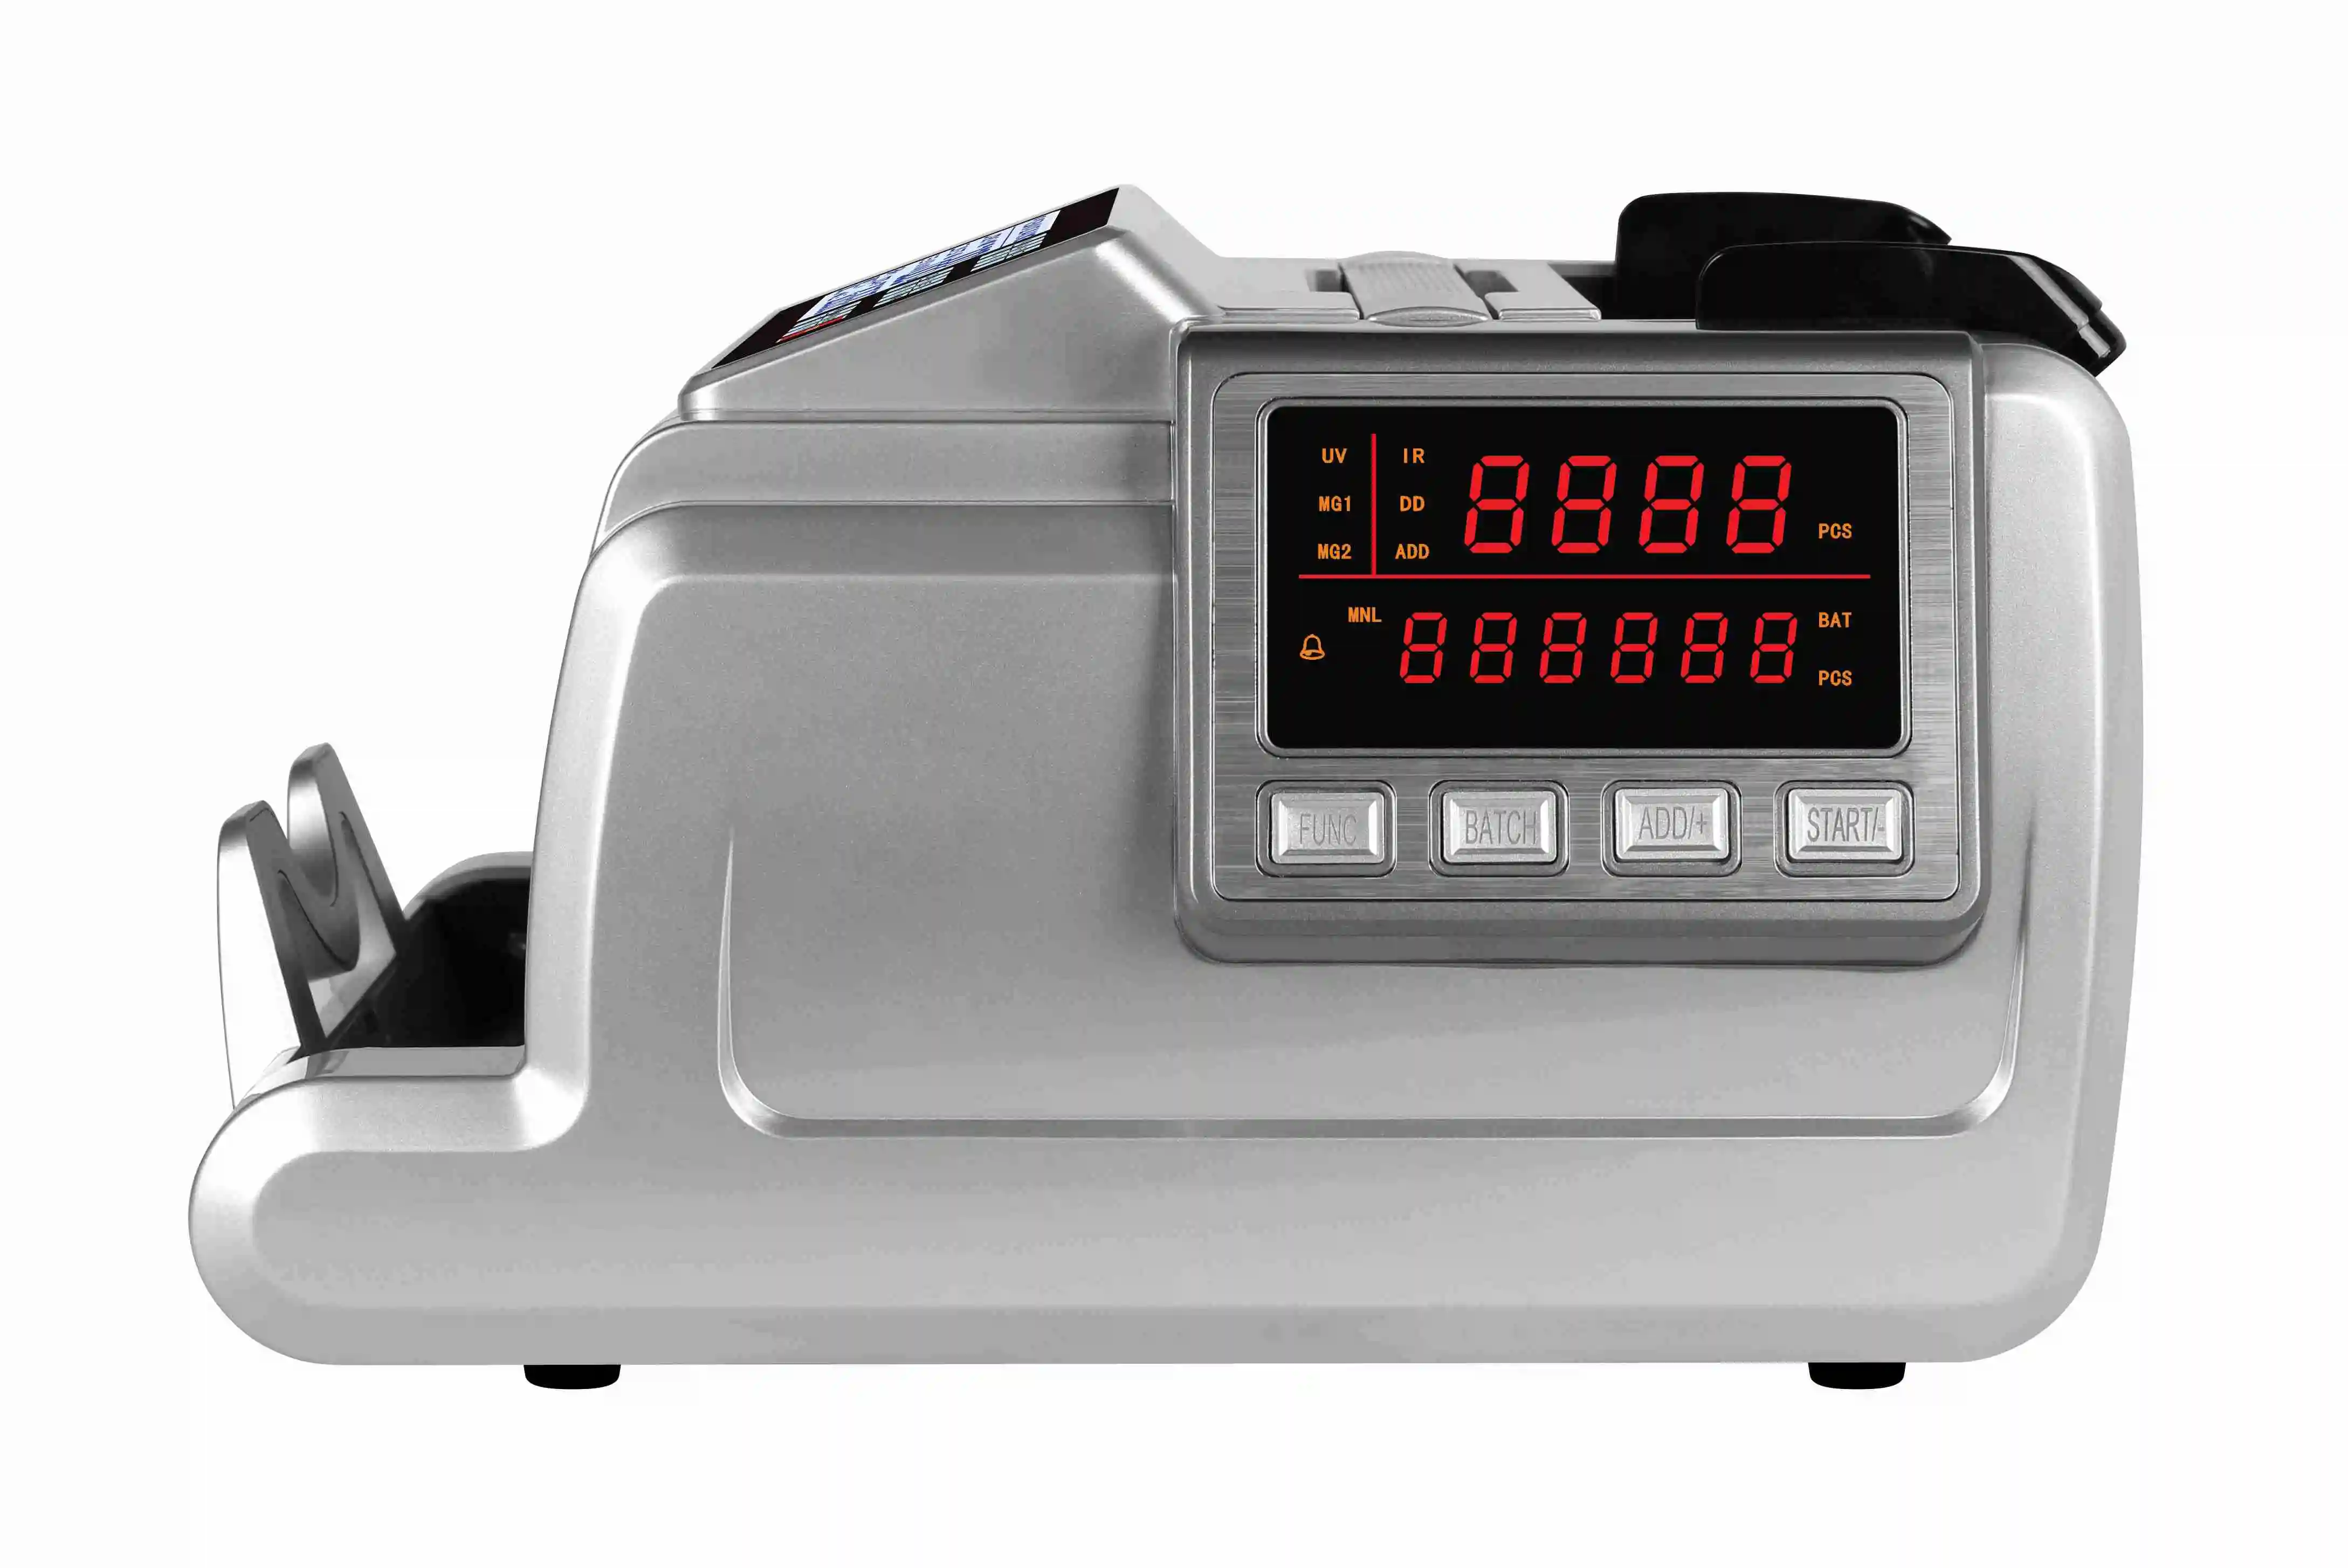 AL-6900W LCD Display Bill Counter With Total Value Calculating Function Handy Bill